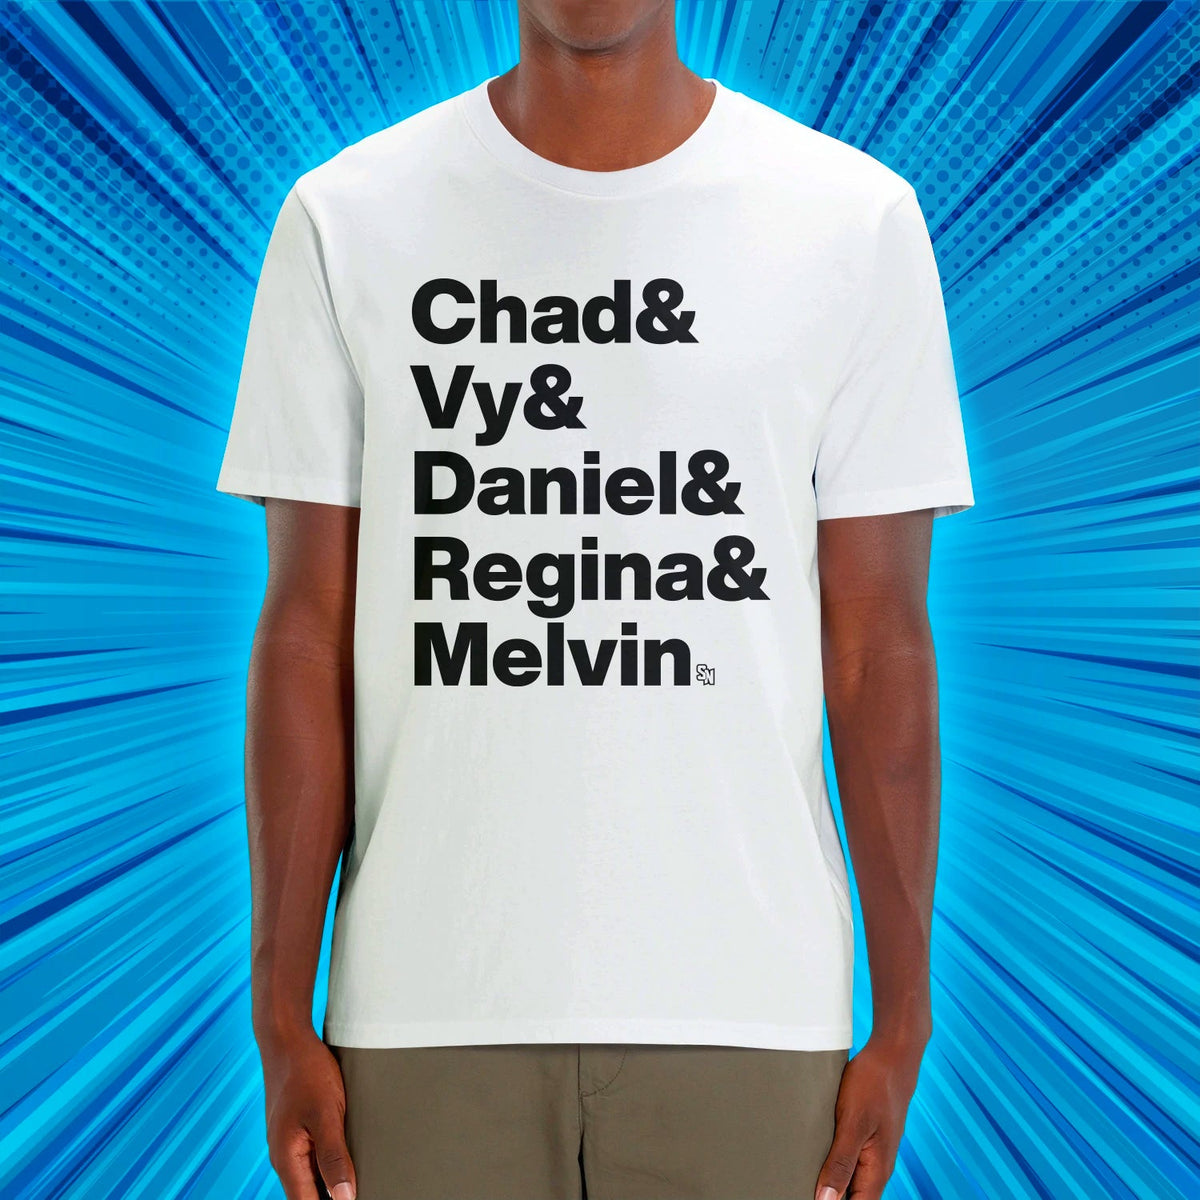 Chad&amp;Vy&amp;... Adult T-shirt